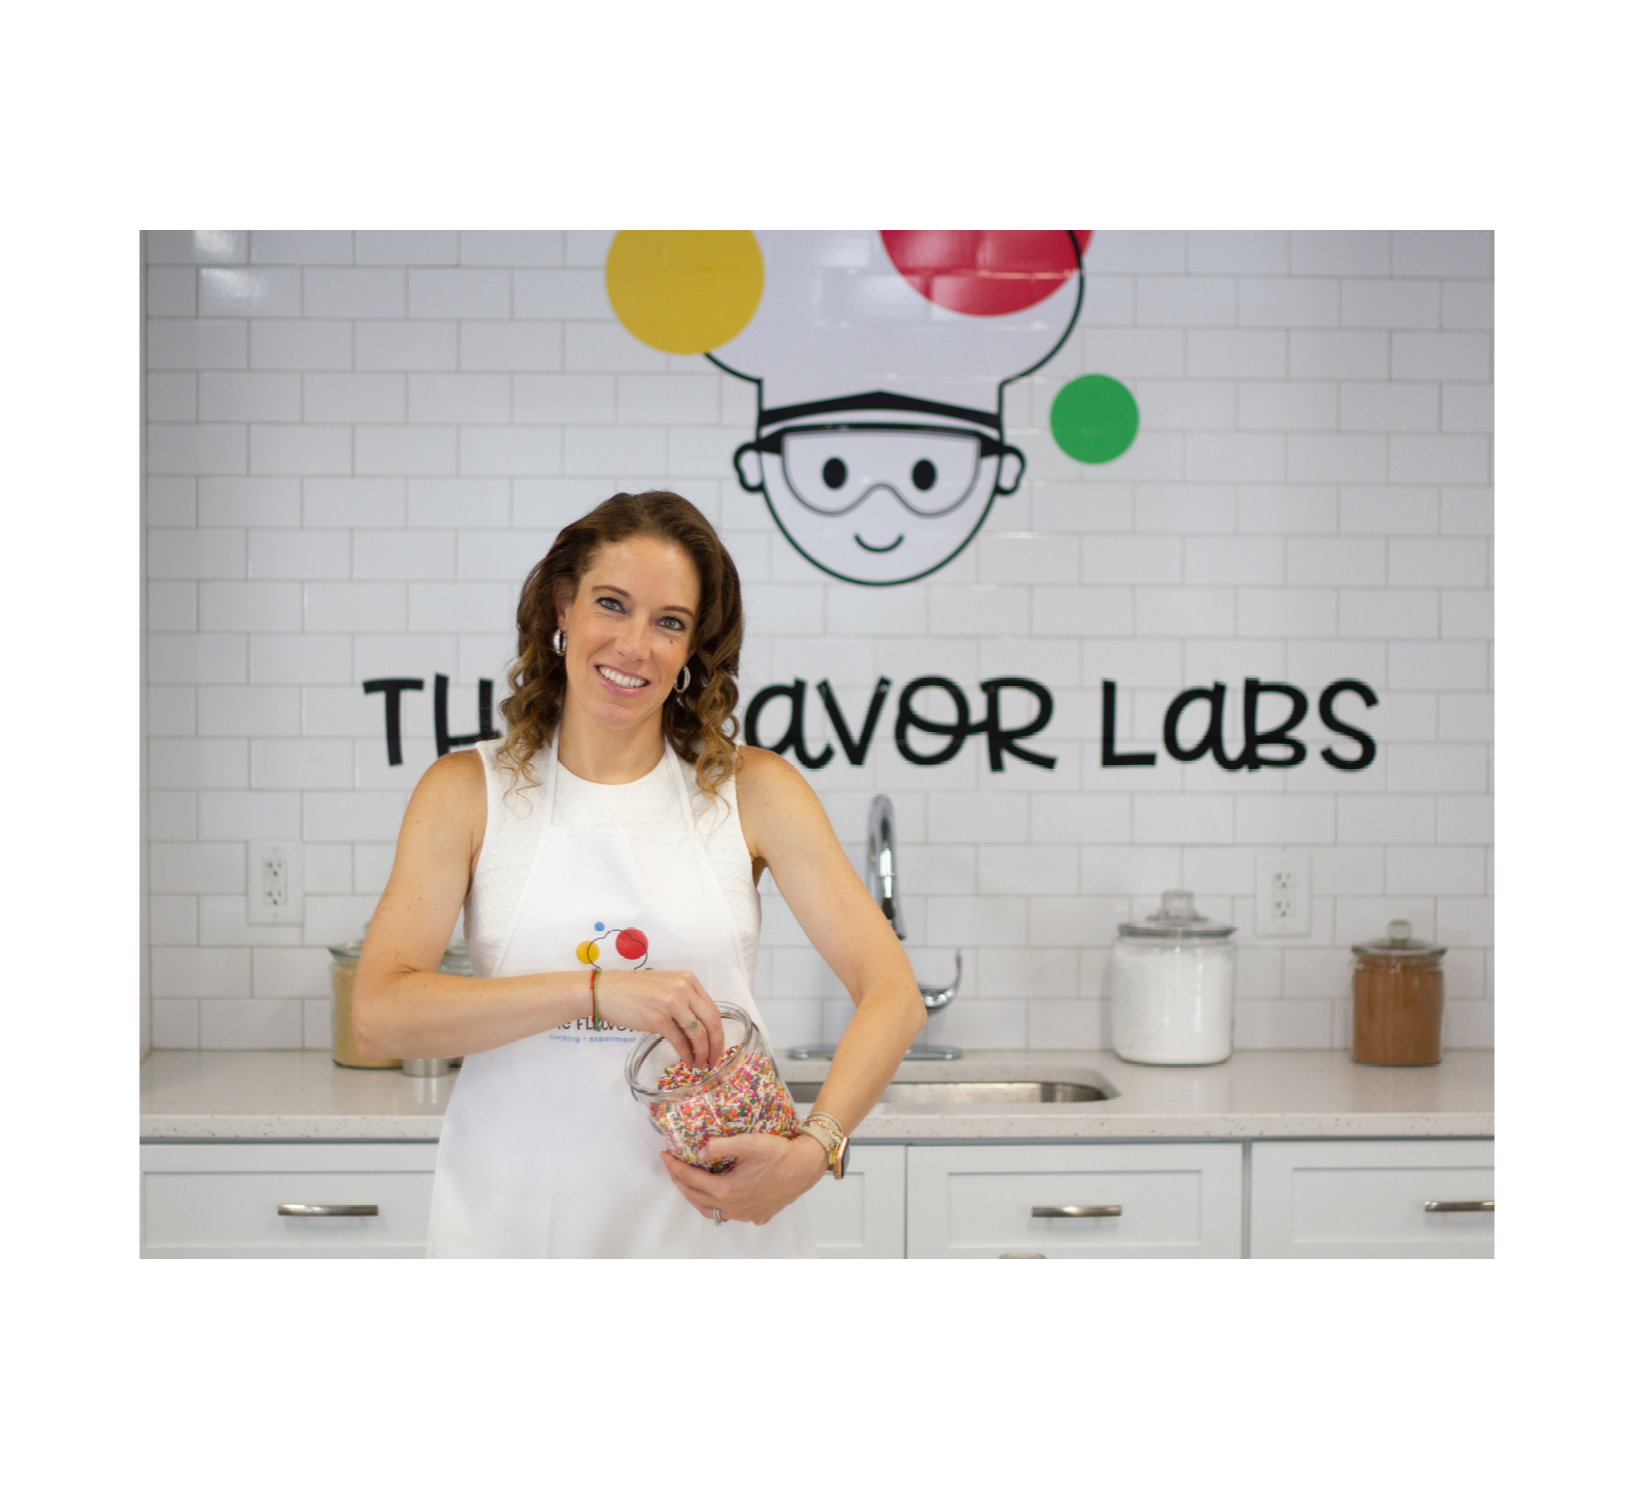 Cooking. Experimentation. Fun. - The Flavor Labs